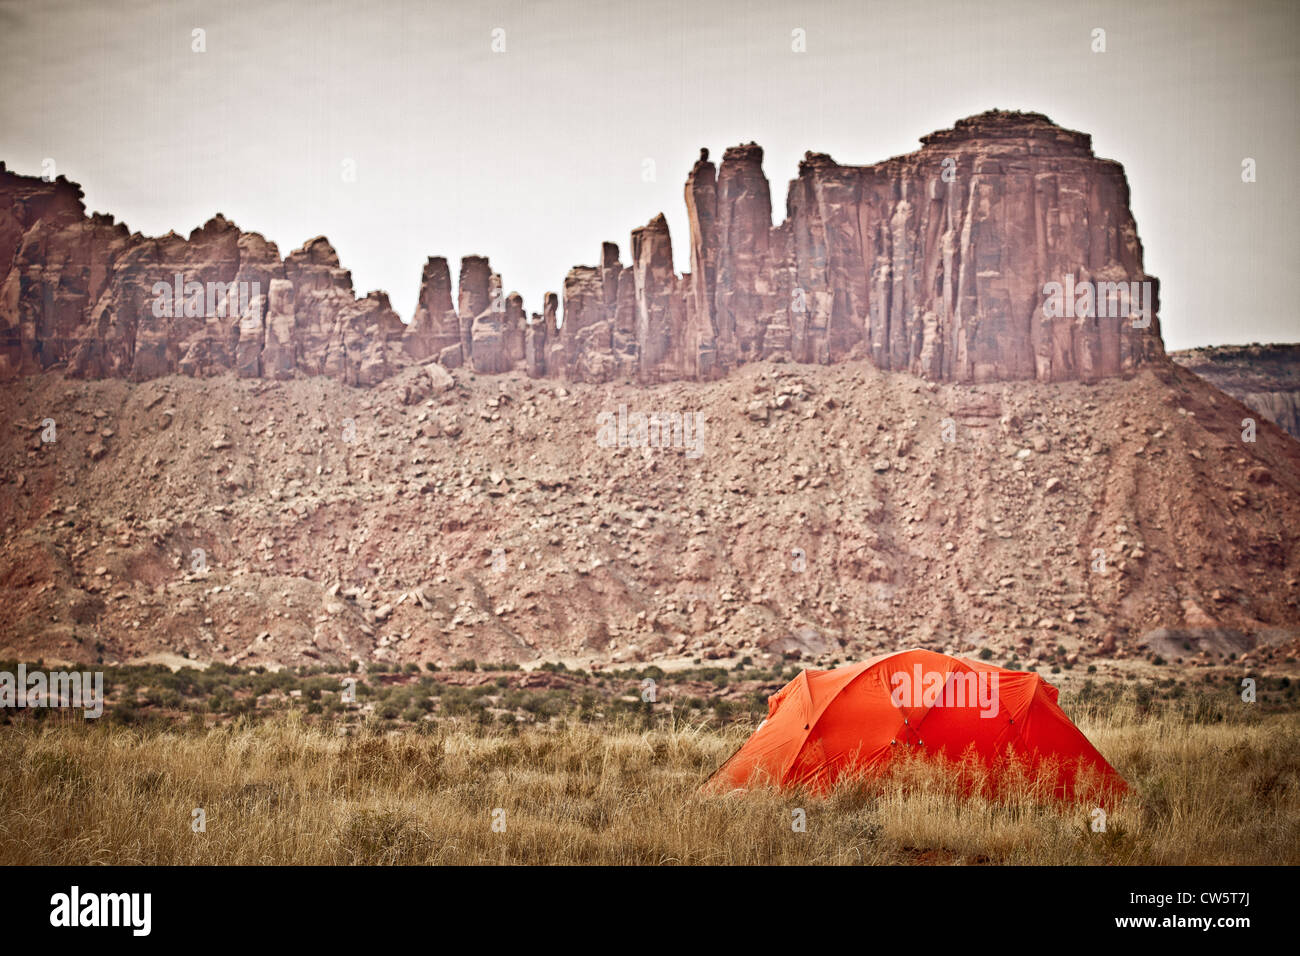 A red tent in the desert in Indian Creek, near Moab, Utah, USA Stock Photo